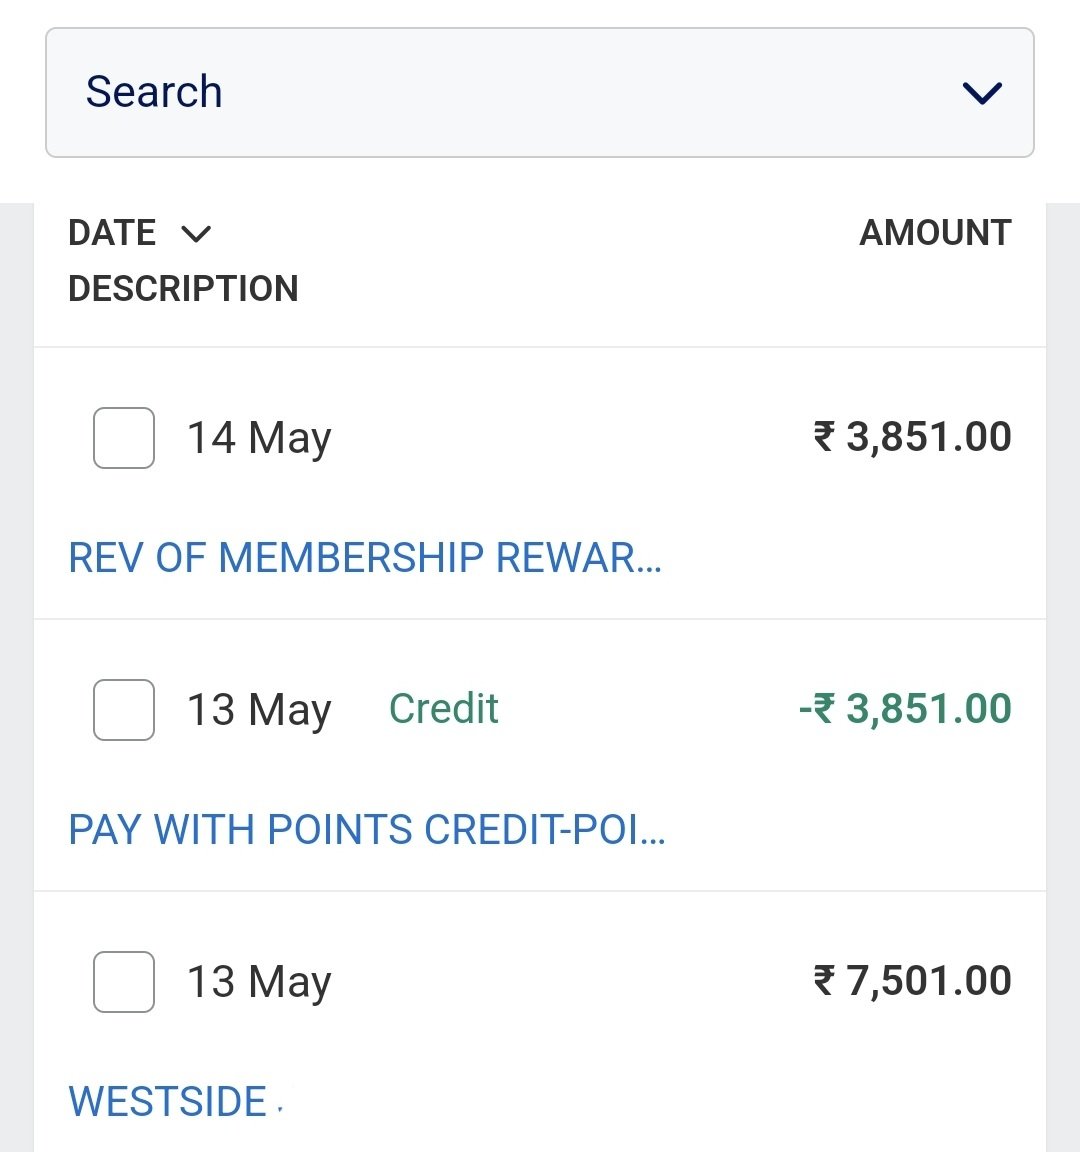 Thank you @Skh27 dada
Your timely advice saved me as had amex points got redeemed while making payment on pos by mistake
Amex doesn't adjust immediately so it gave wrong impression that got 50% value as 15k rp for 7.5k bill
but dada clarified & I raised, amex helped
#amex